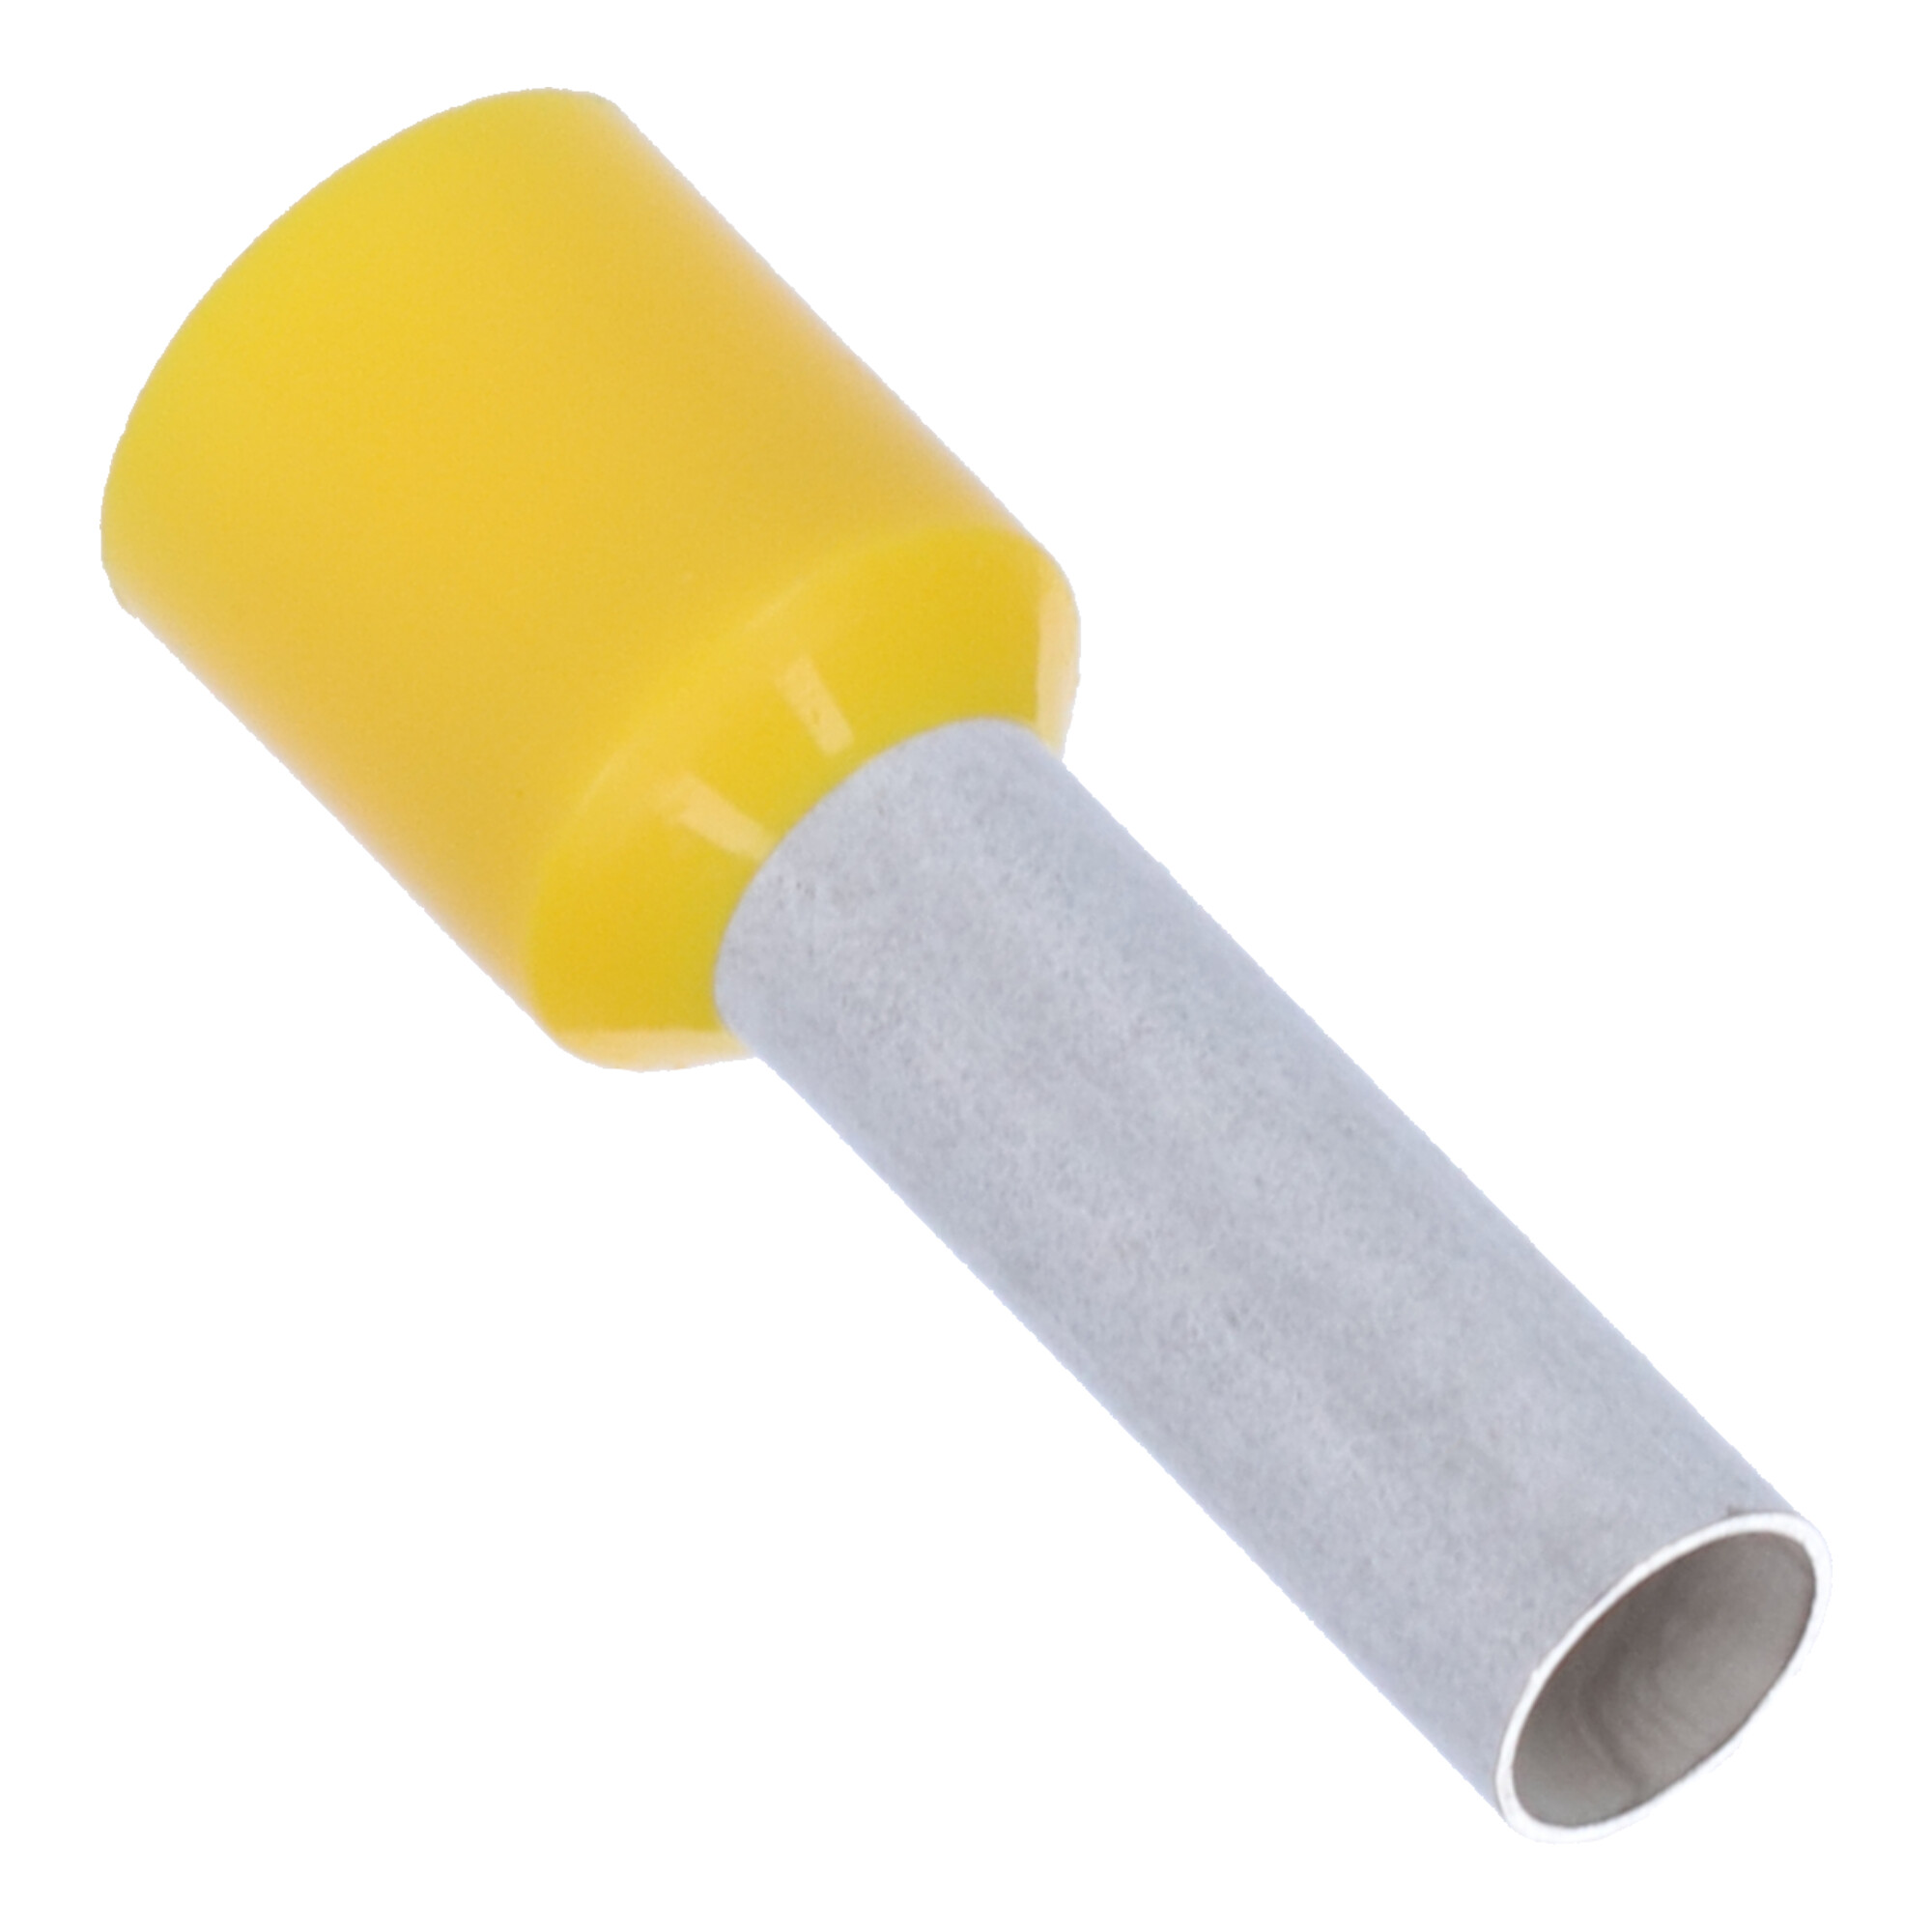 15-01057 Insulated wire end sleeve